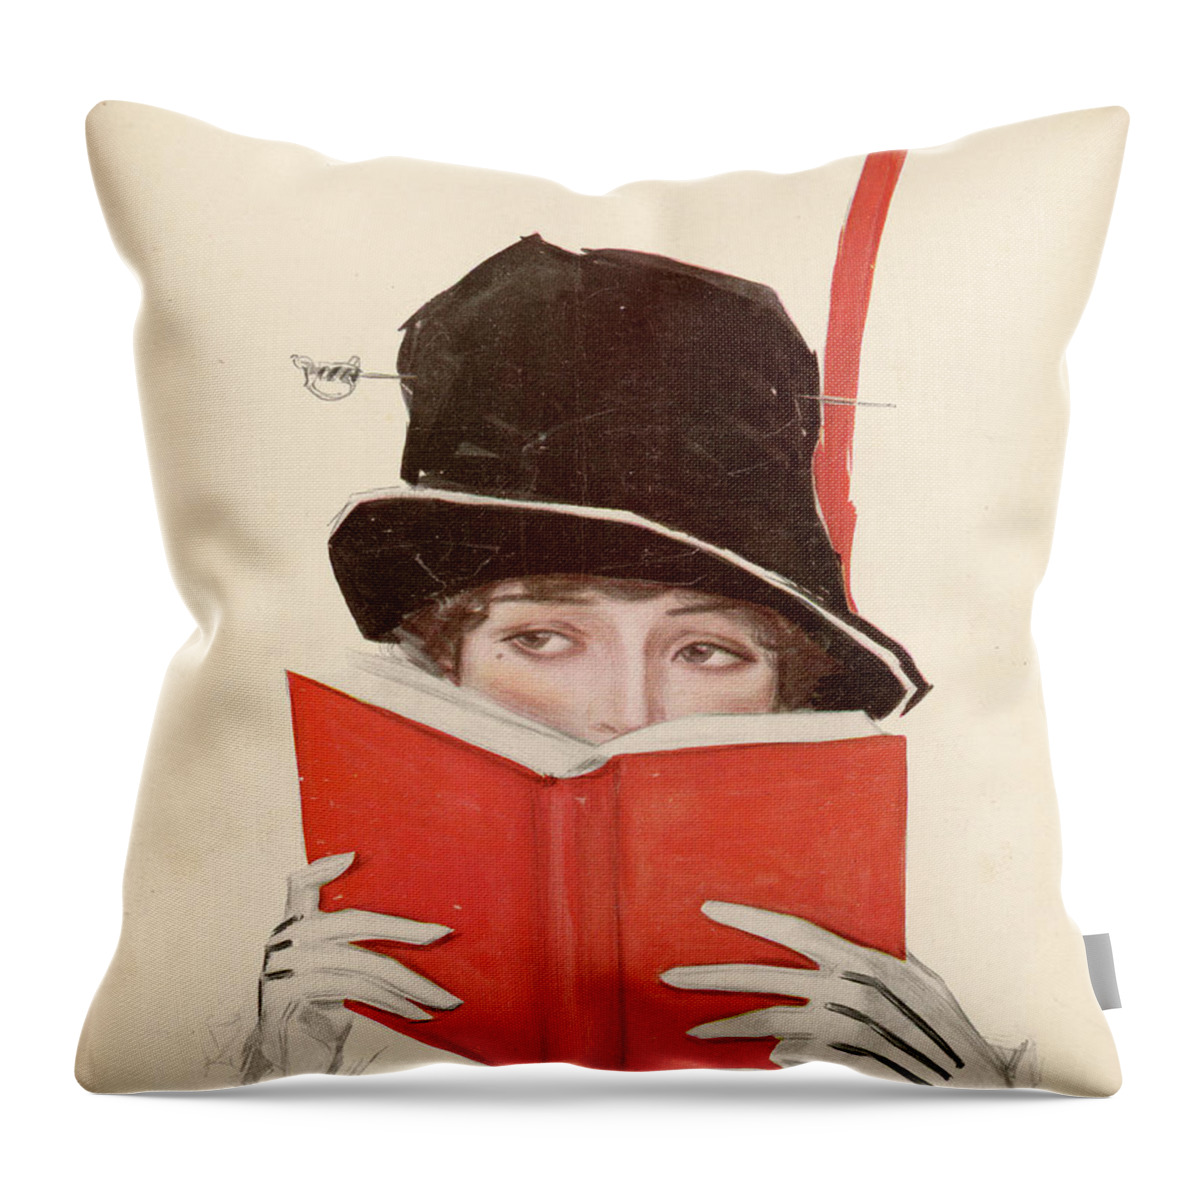 Life Magazine Cover Throw Pillow featuring the mixed media Life Magazine Cover, March 9, 1911 by Henry Hutt